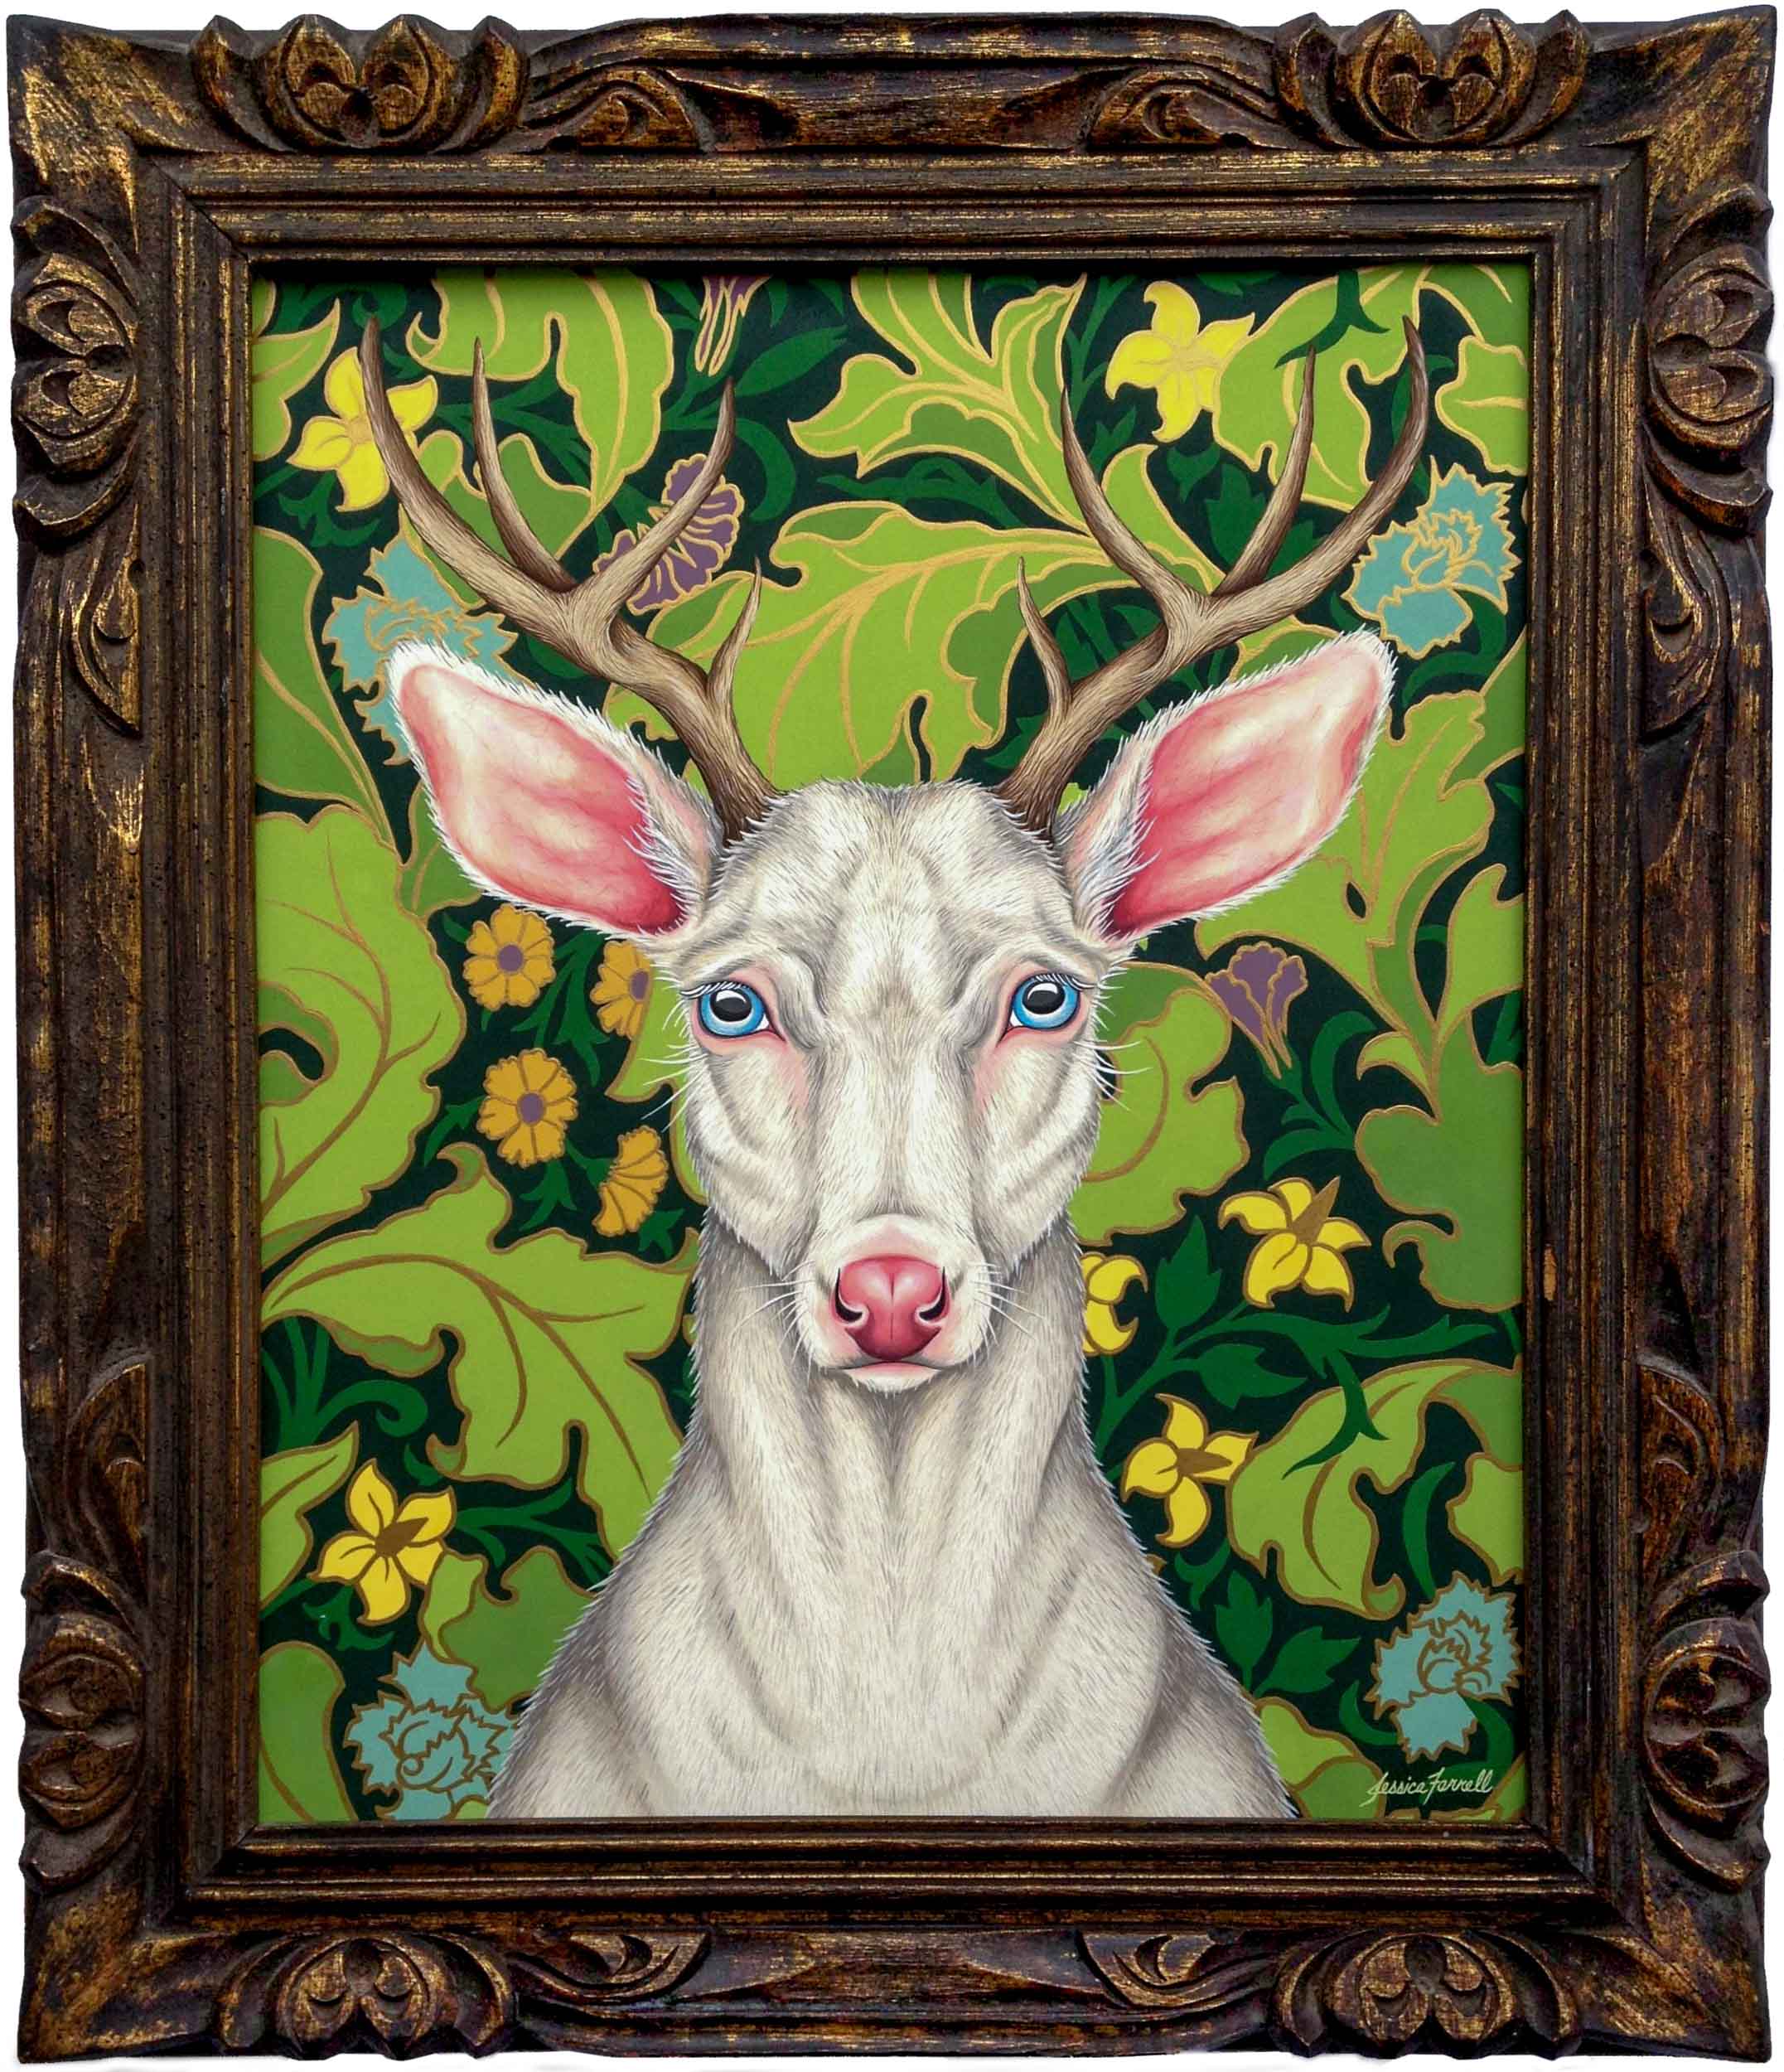   Albino Deer,  Acrylic on wood with vintage frame, 29 x 25 inches (framed)    (private collection) 